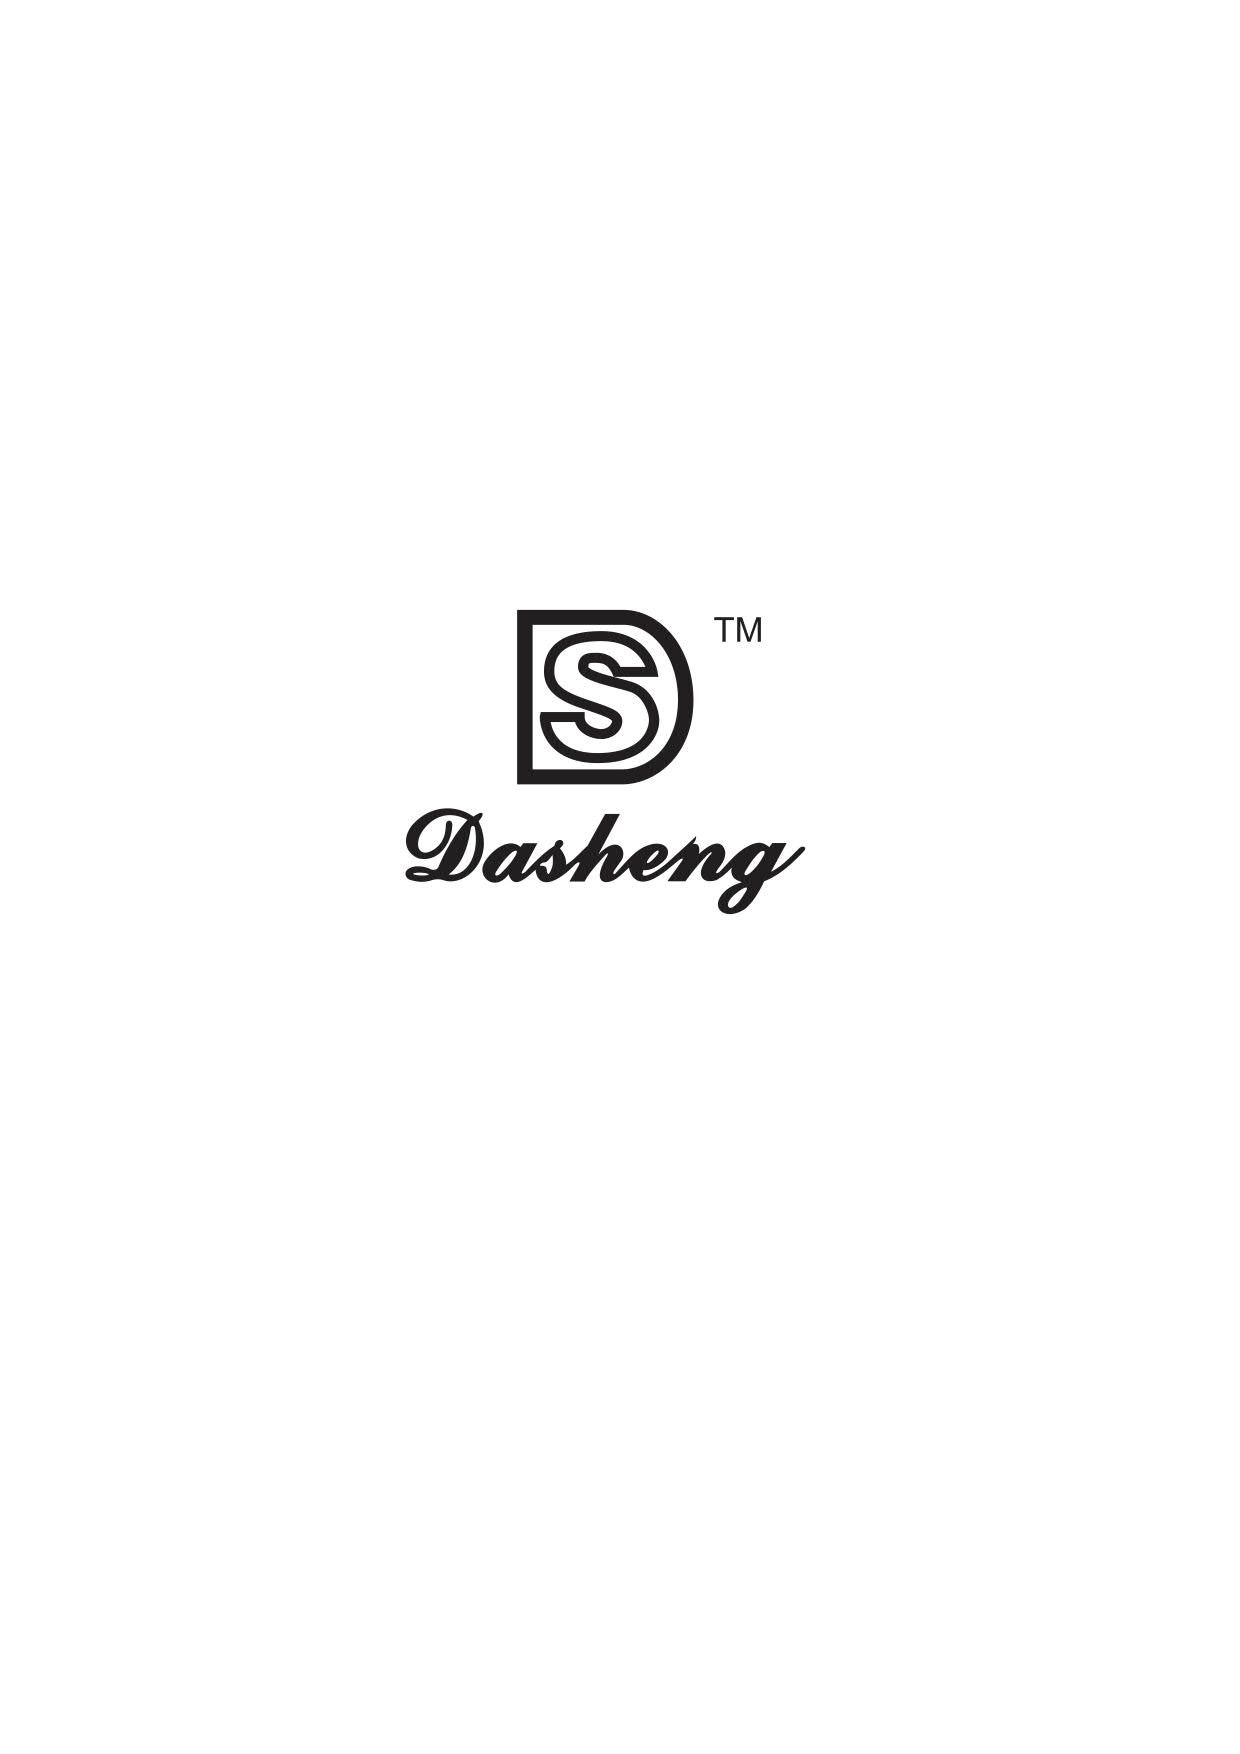 Shanghai Dasheng Health Products Manufacture Co